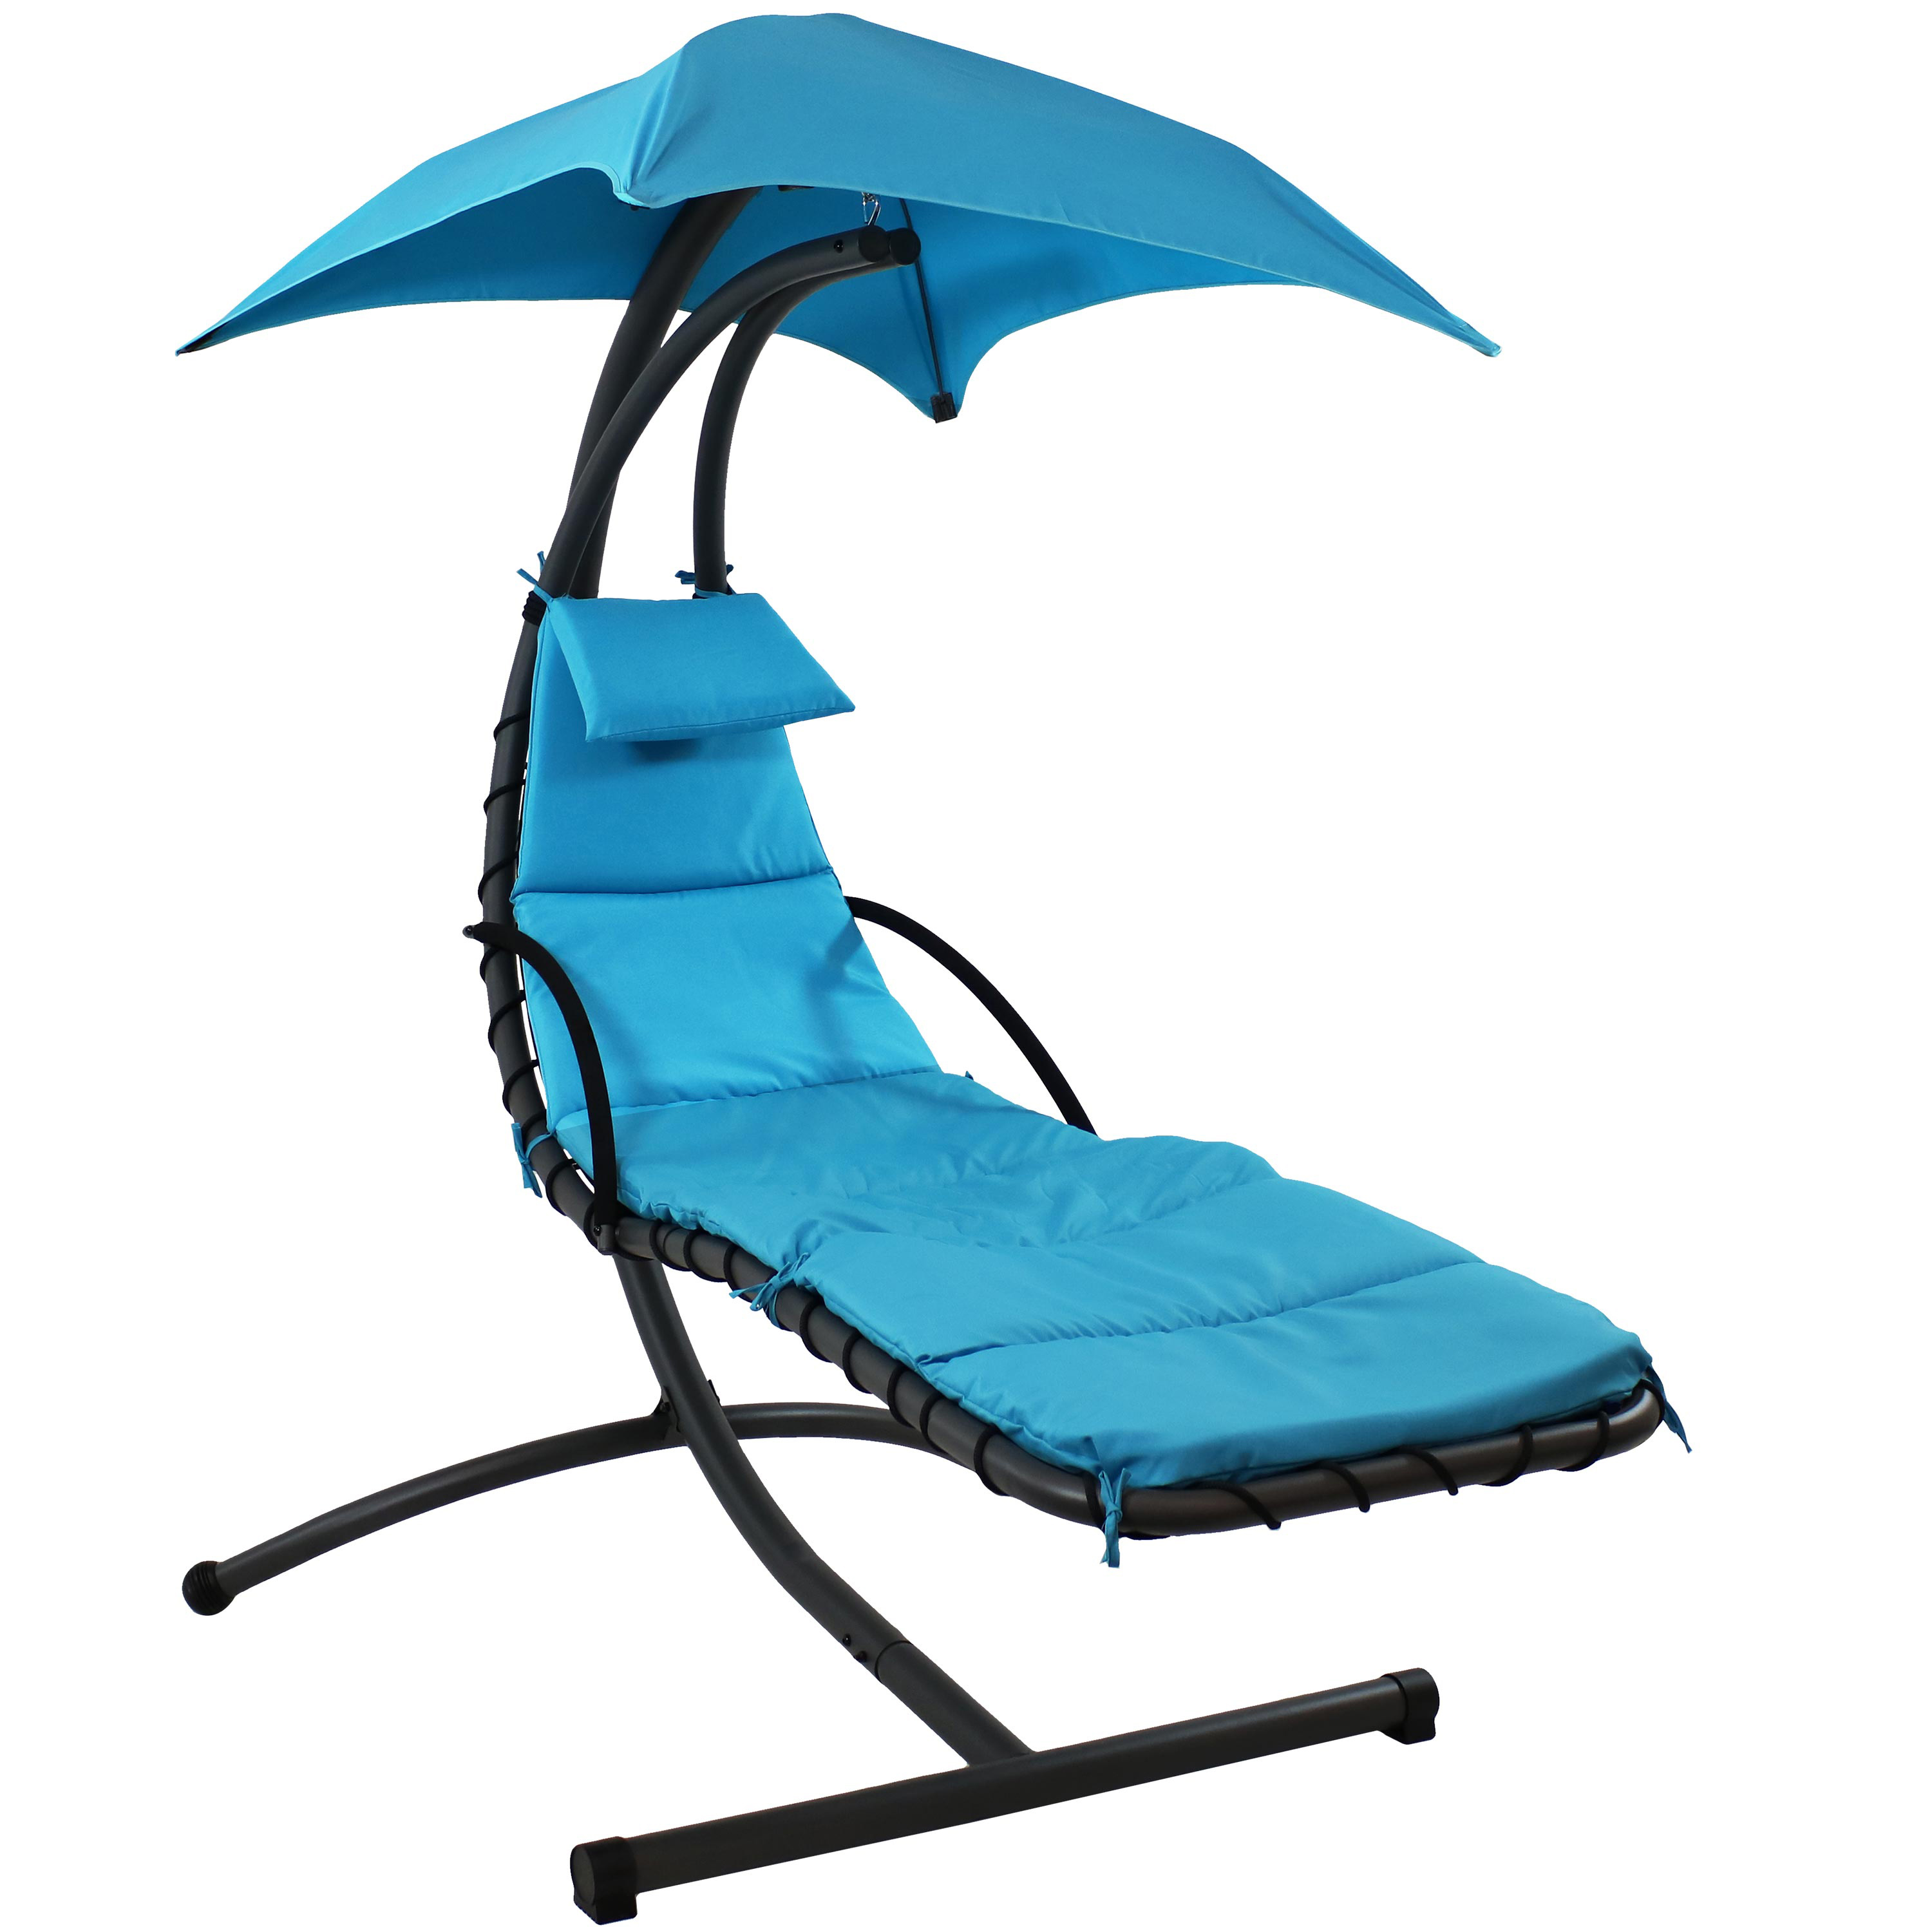 Sunnydaze Floating Chaise Lounge Chair, 260 Pound Capacity, Teal